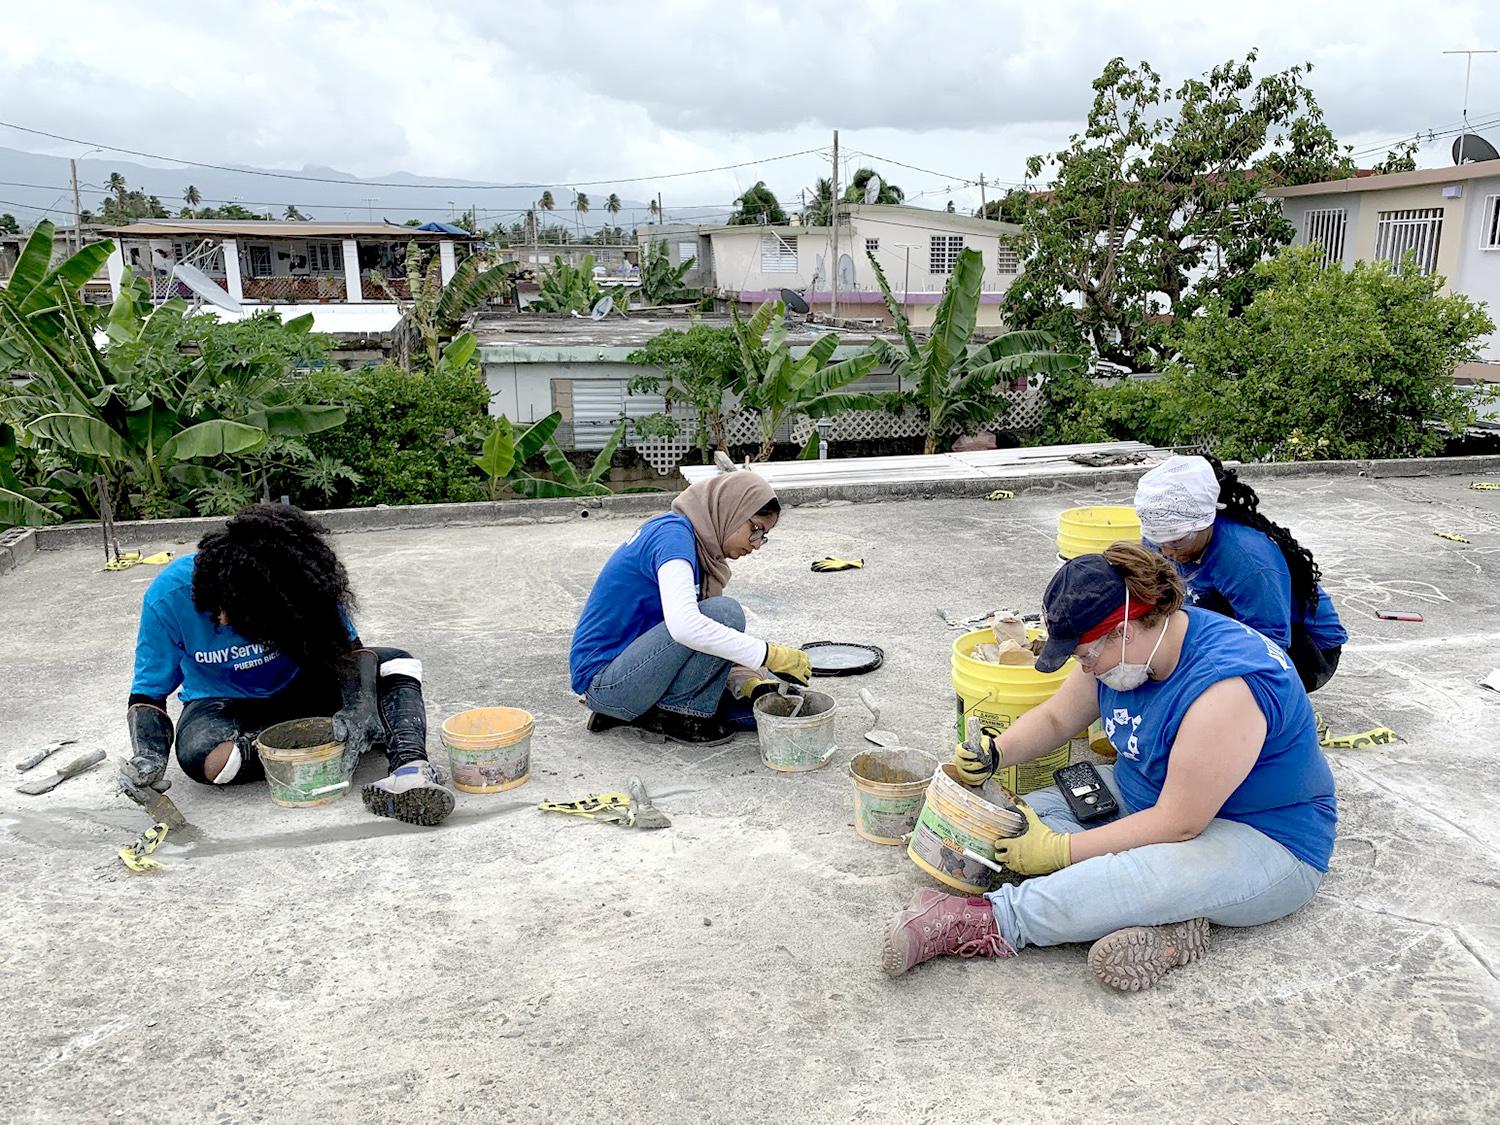 Students work on patching a roof in Puerto Rico